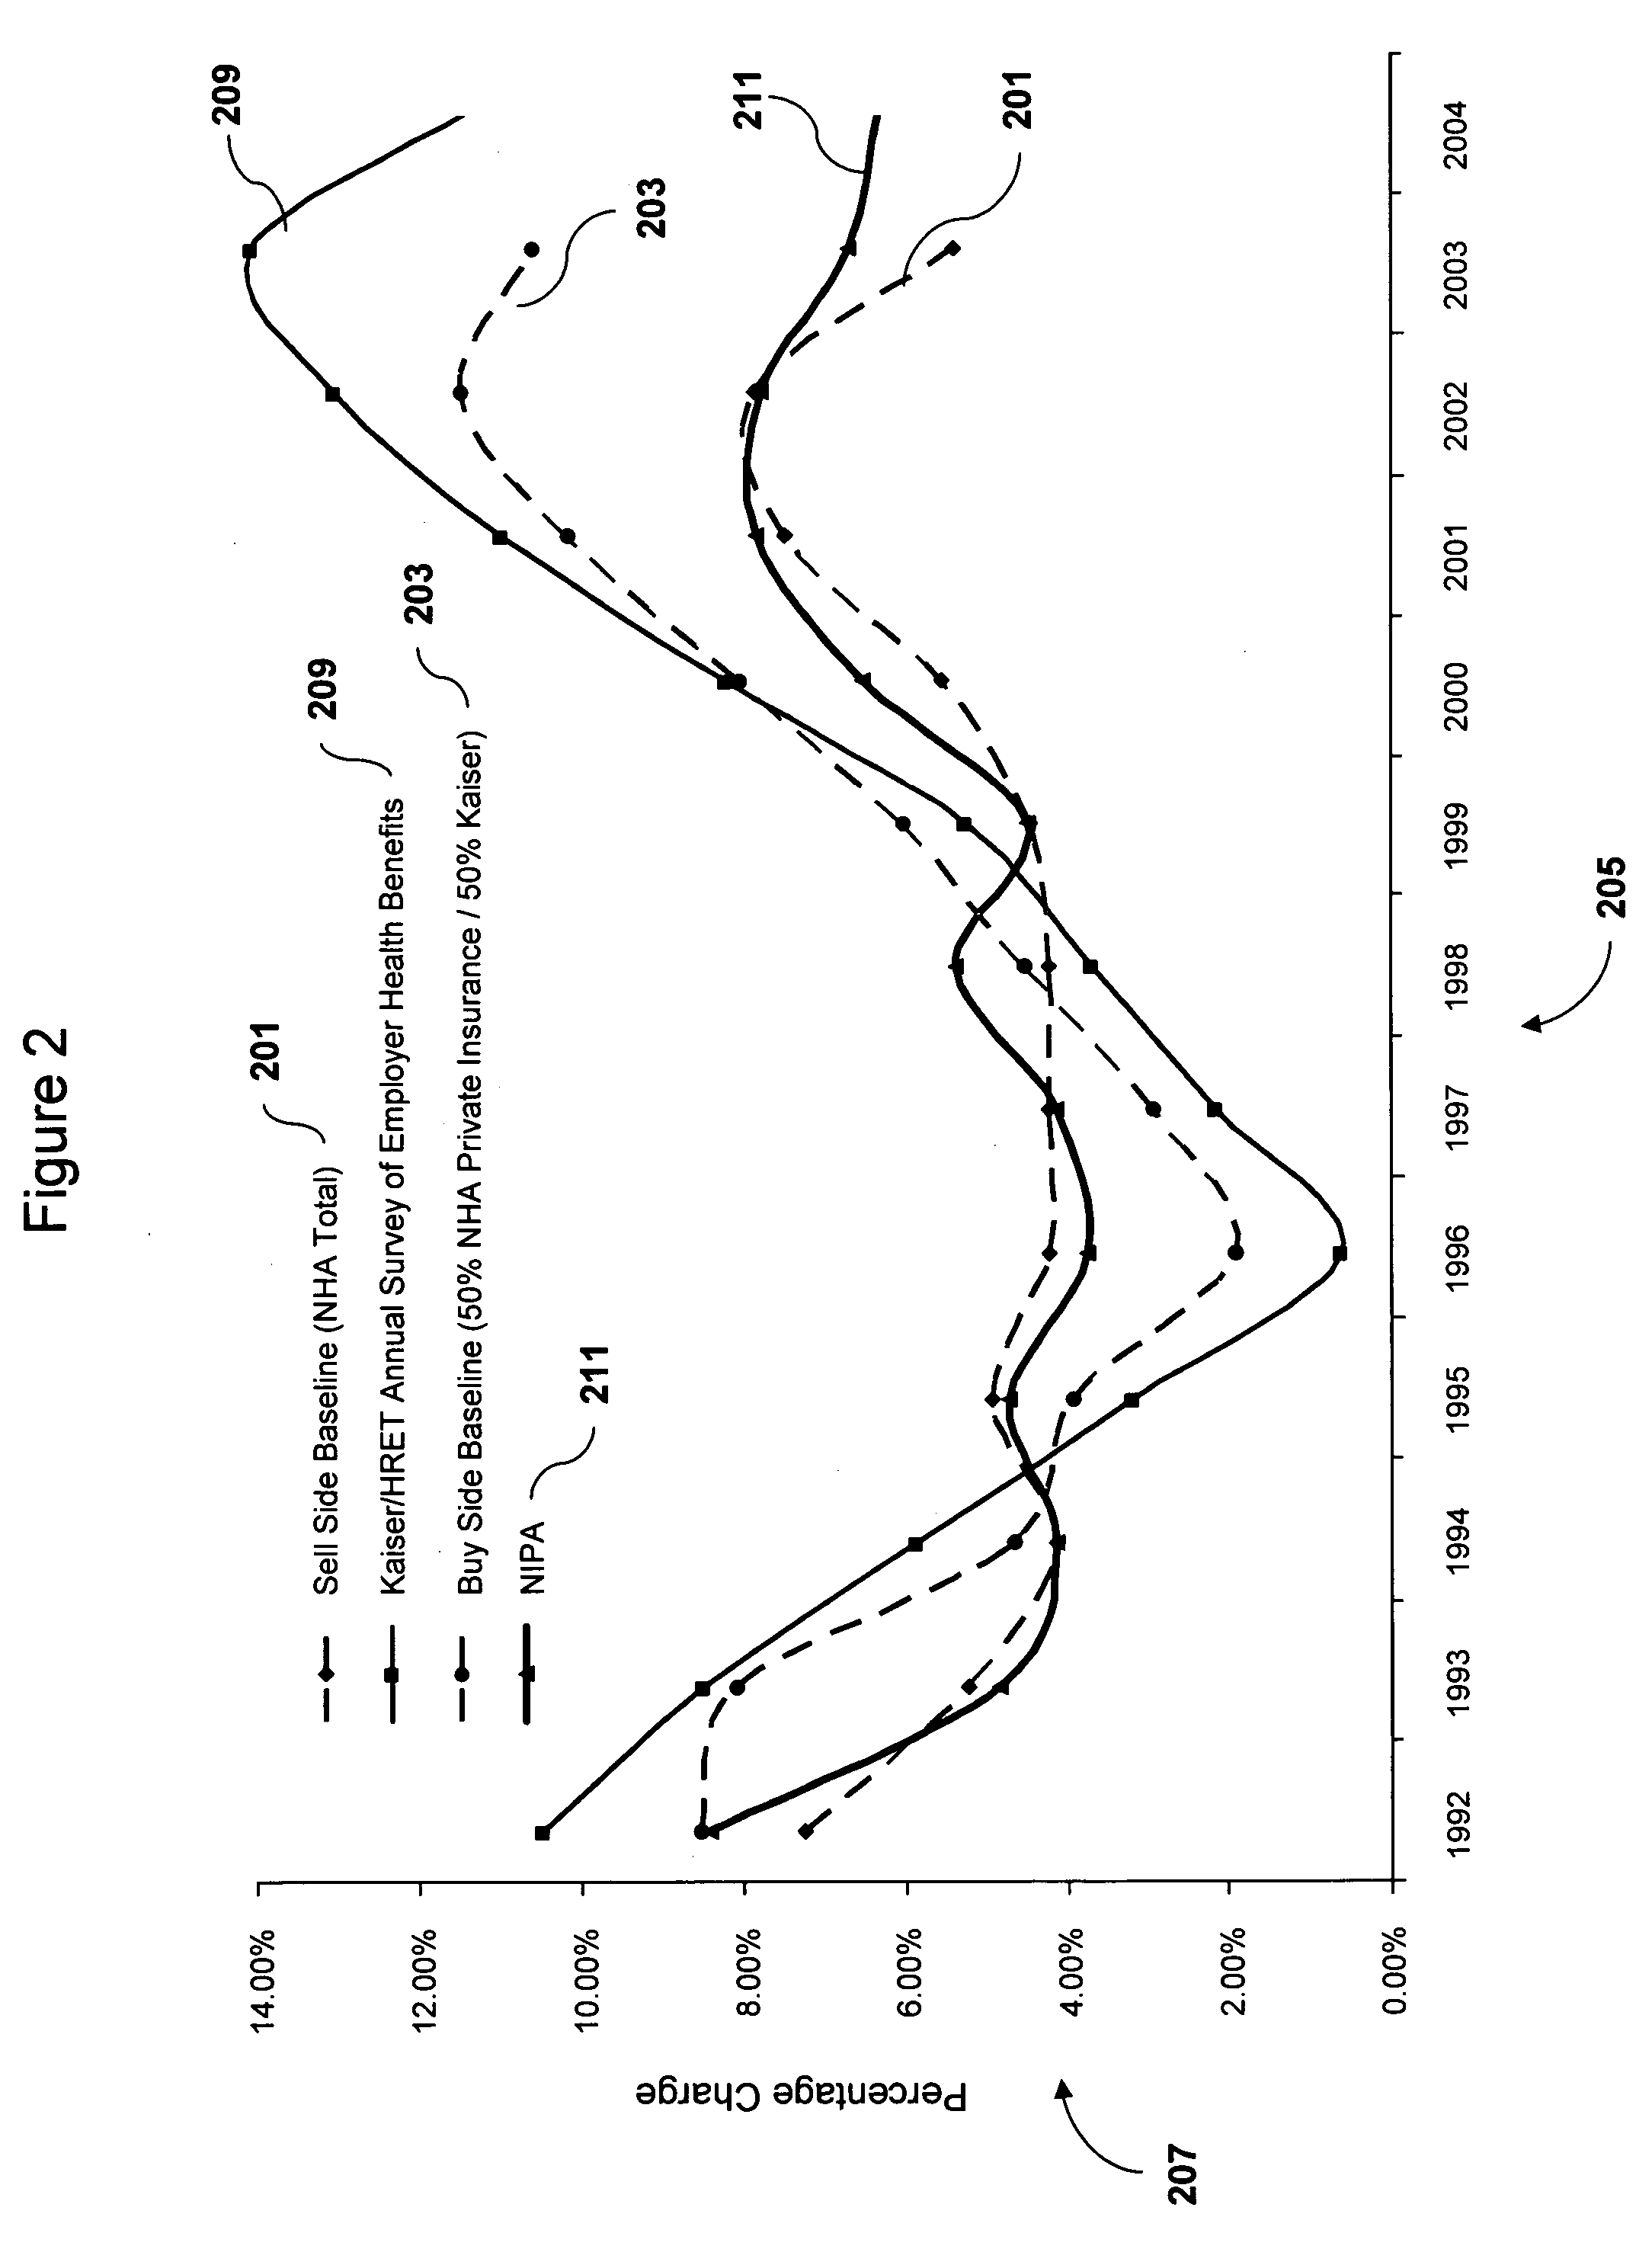 System and method for managing healthcare costs